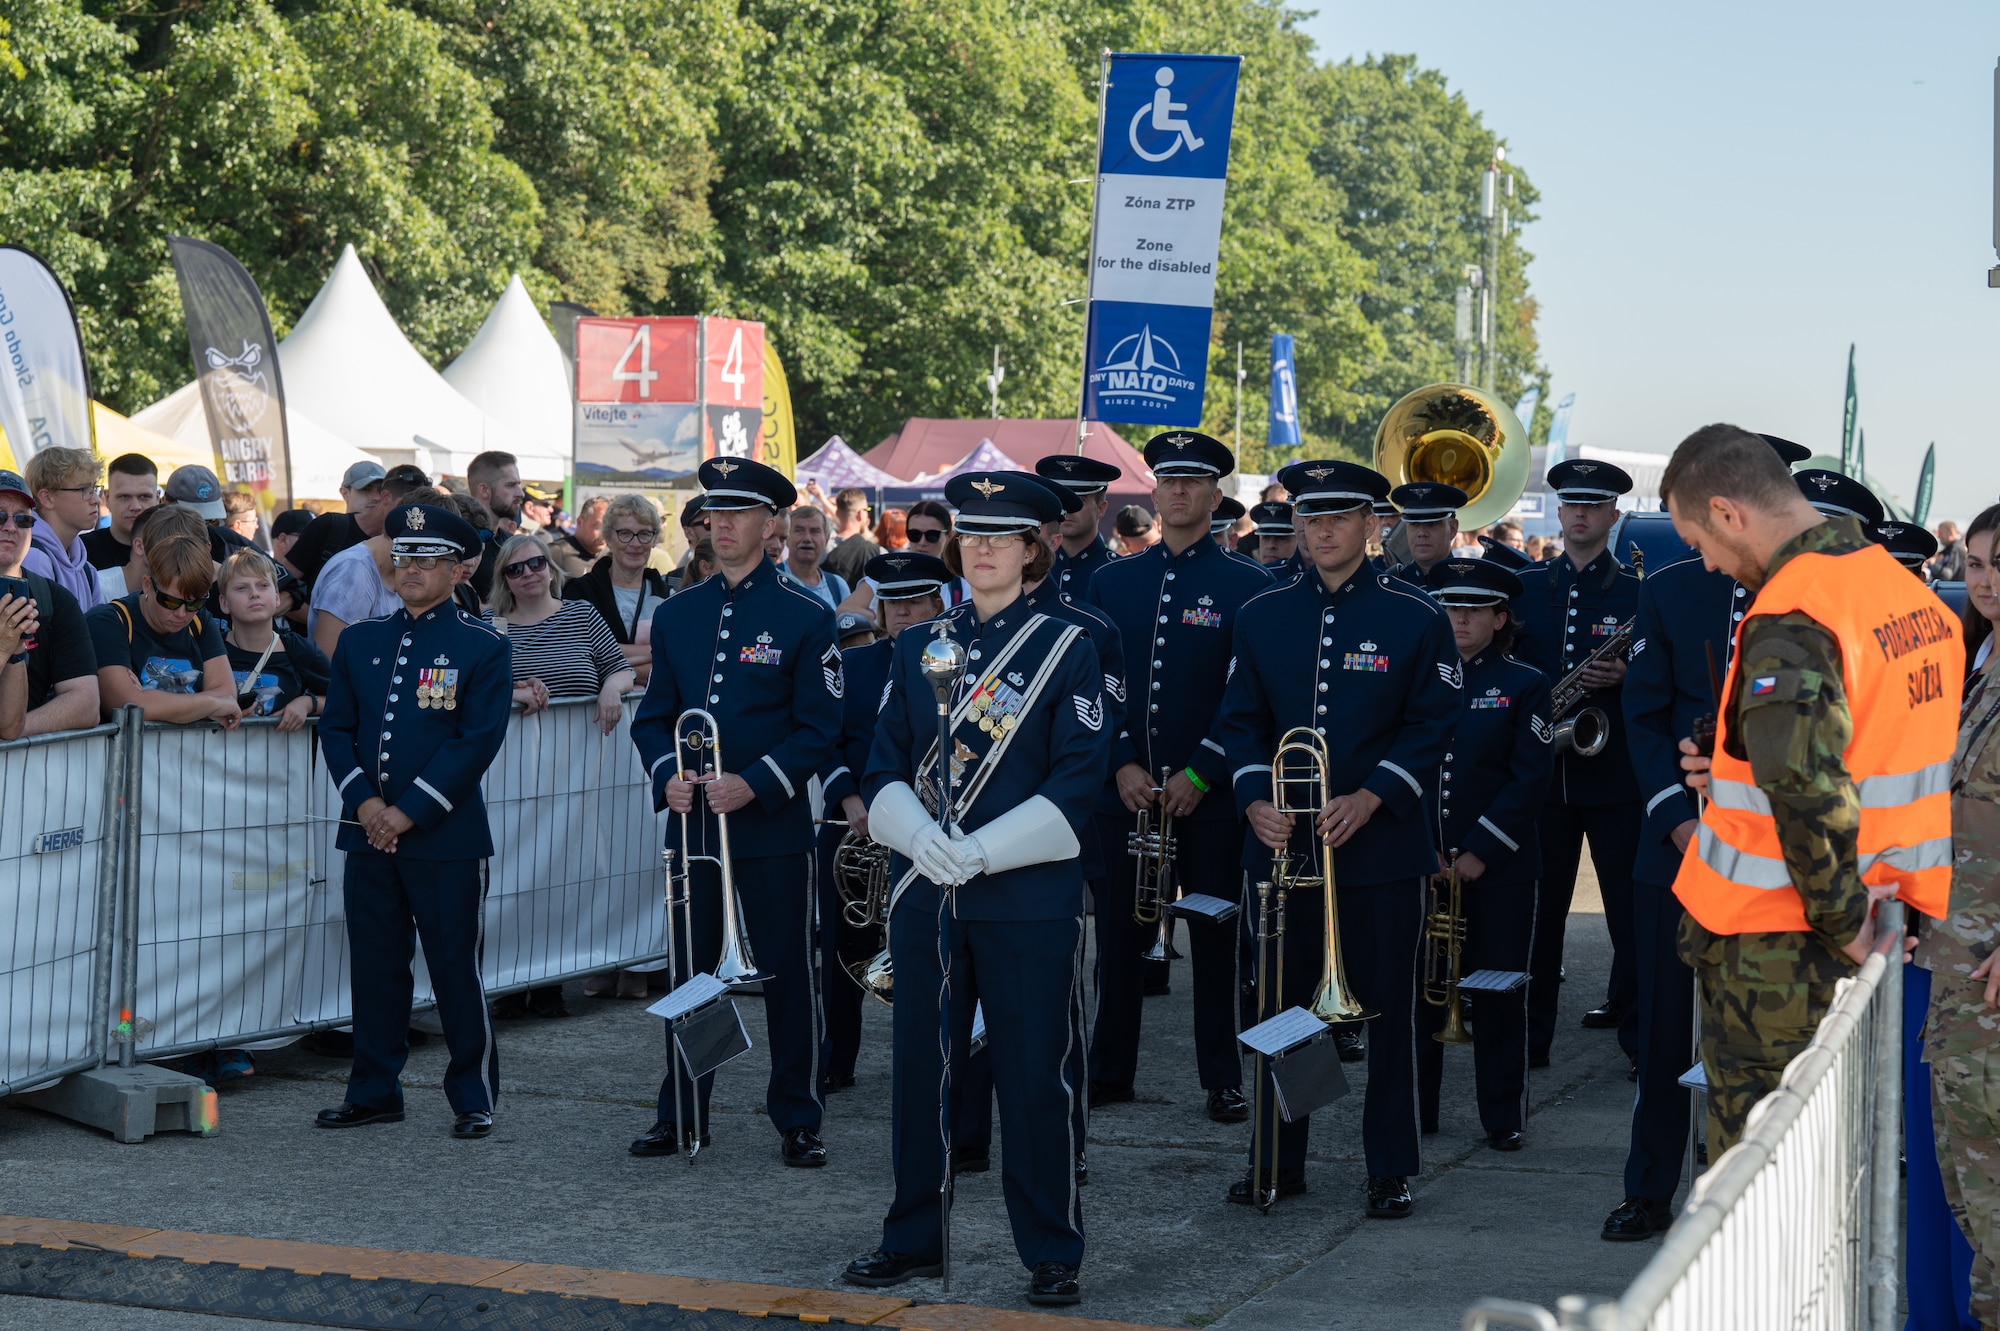 U.S. Air Force Airmen assigned to the U.S. Air Forces in Europe Ceremonial Band, prepare to march during the opening ceremony of the NATO Days event at Leoš Janáček Airport in Ostrava, Czech Republic, Sept. 16, 2023.